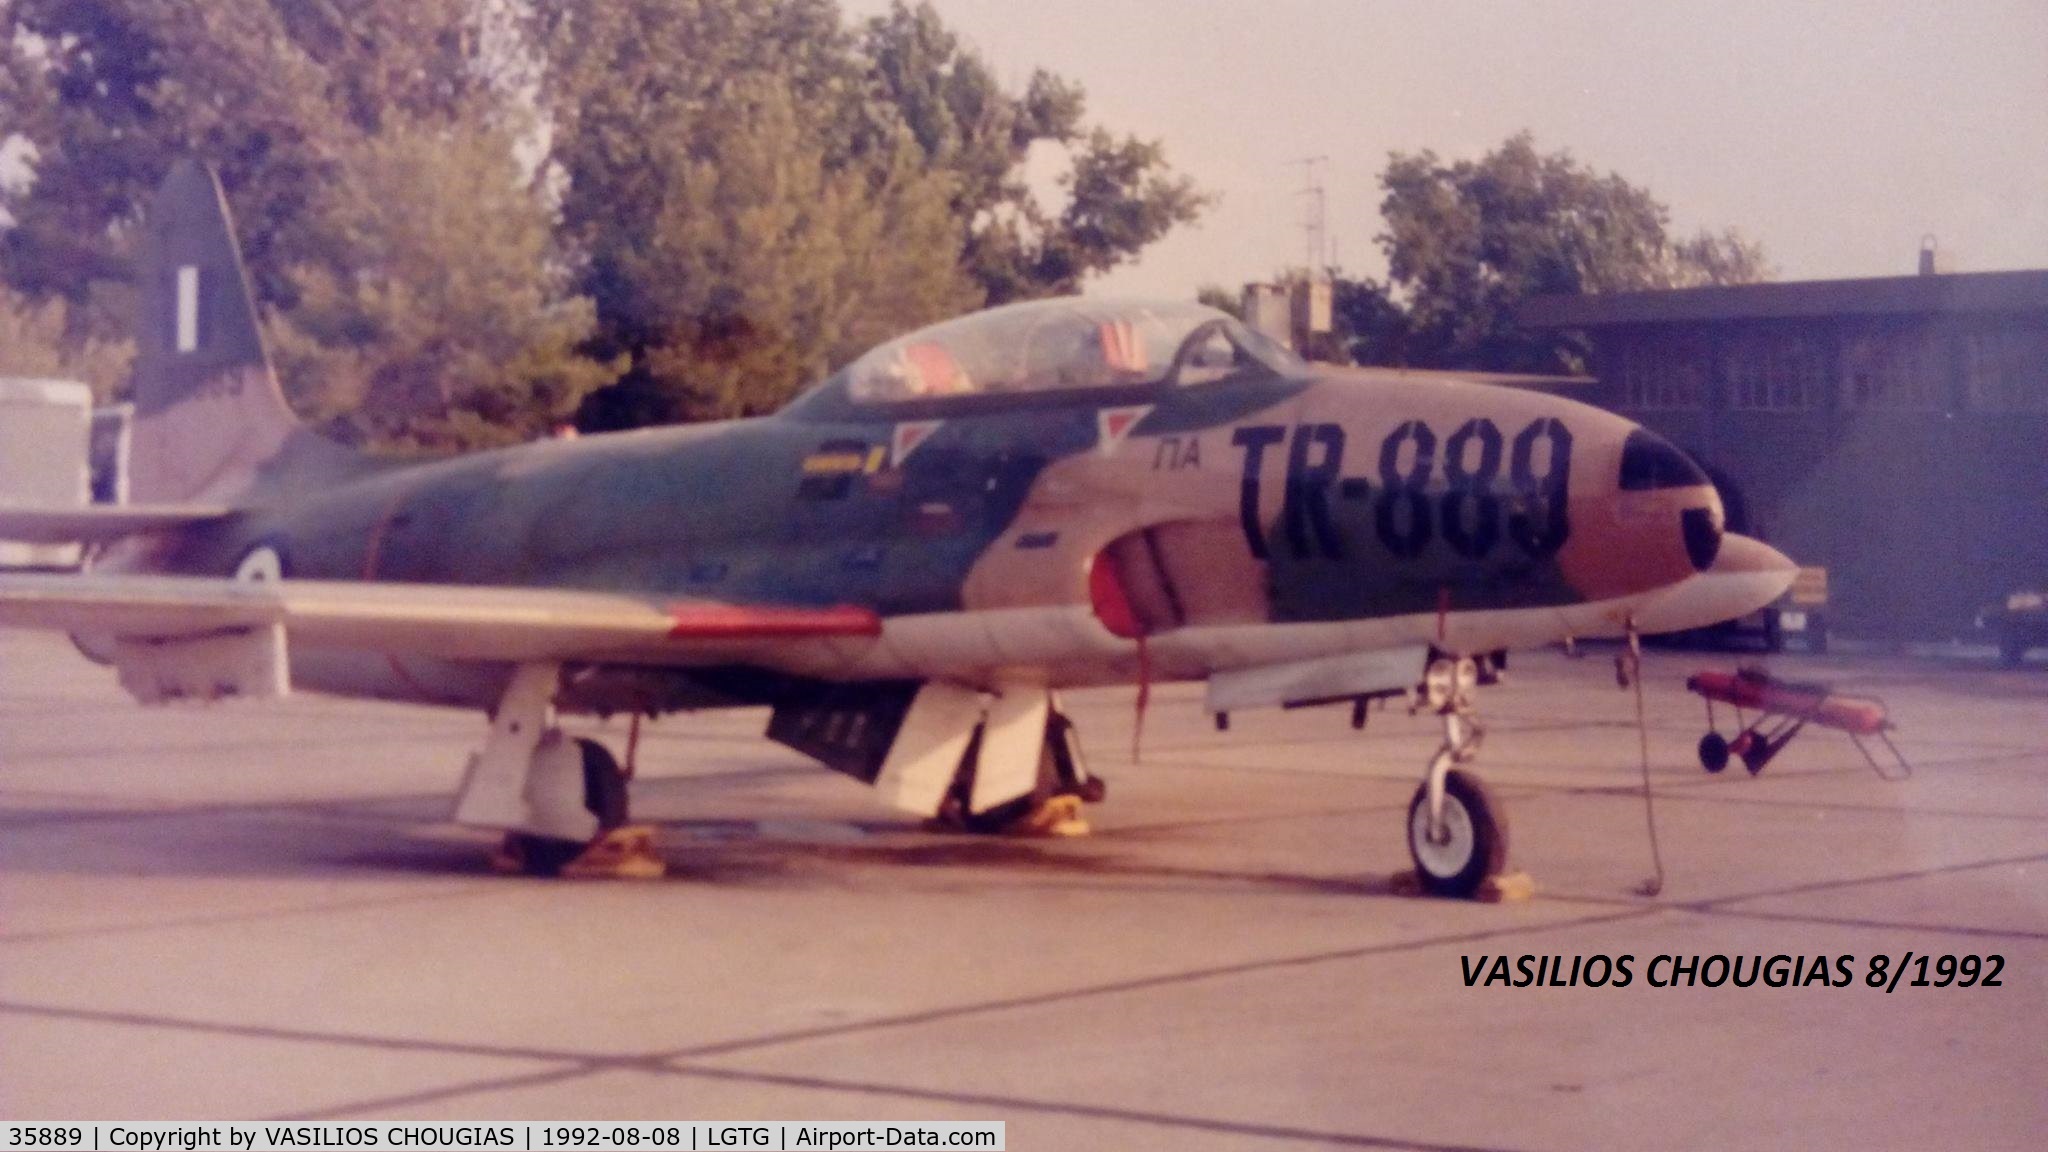 35889, 1953 Lockheed T-33A Shooting Star C/N 580-9365, Personal photo from my years of service.